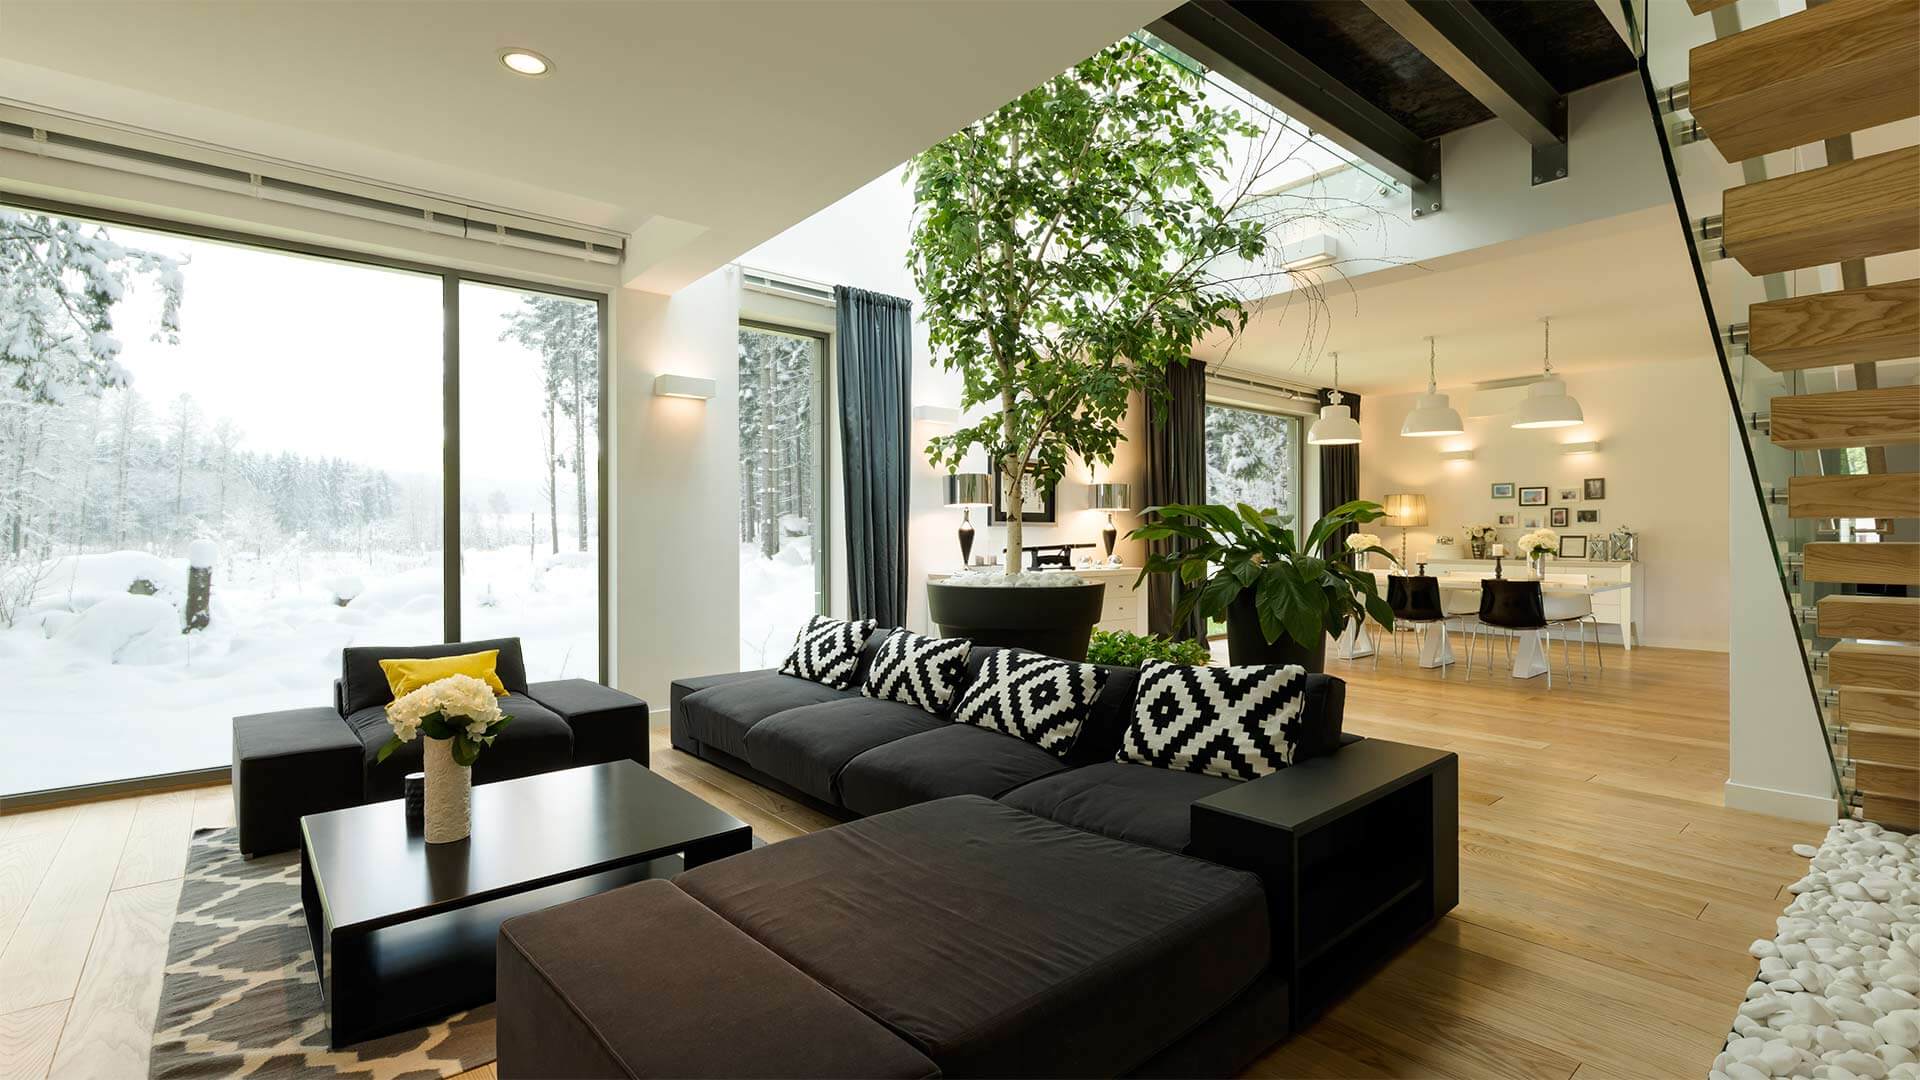 A modern home interior with plants, black sectional and Northern Comfort Patio Windows.